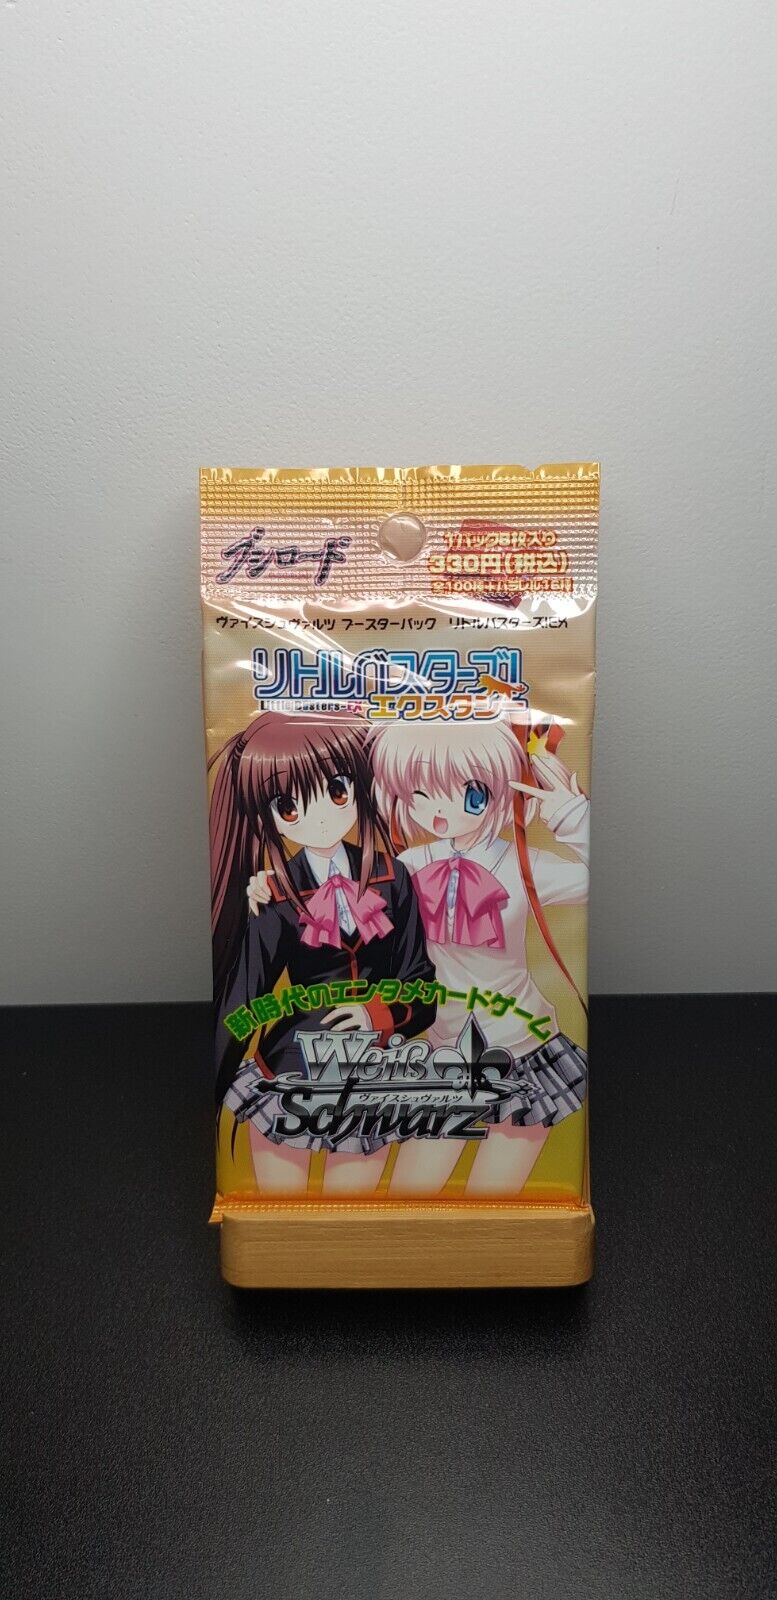 Booster White Black Little Busters Ecstasy LBW06 - Japanese Edition